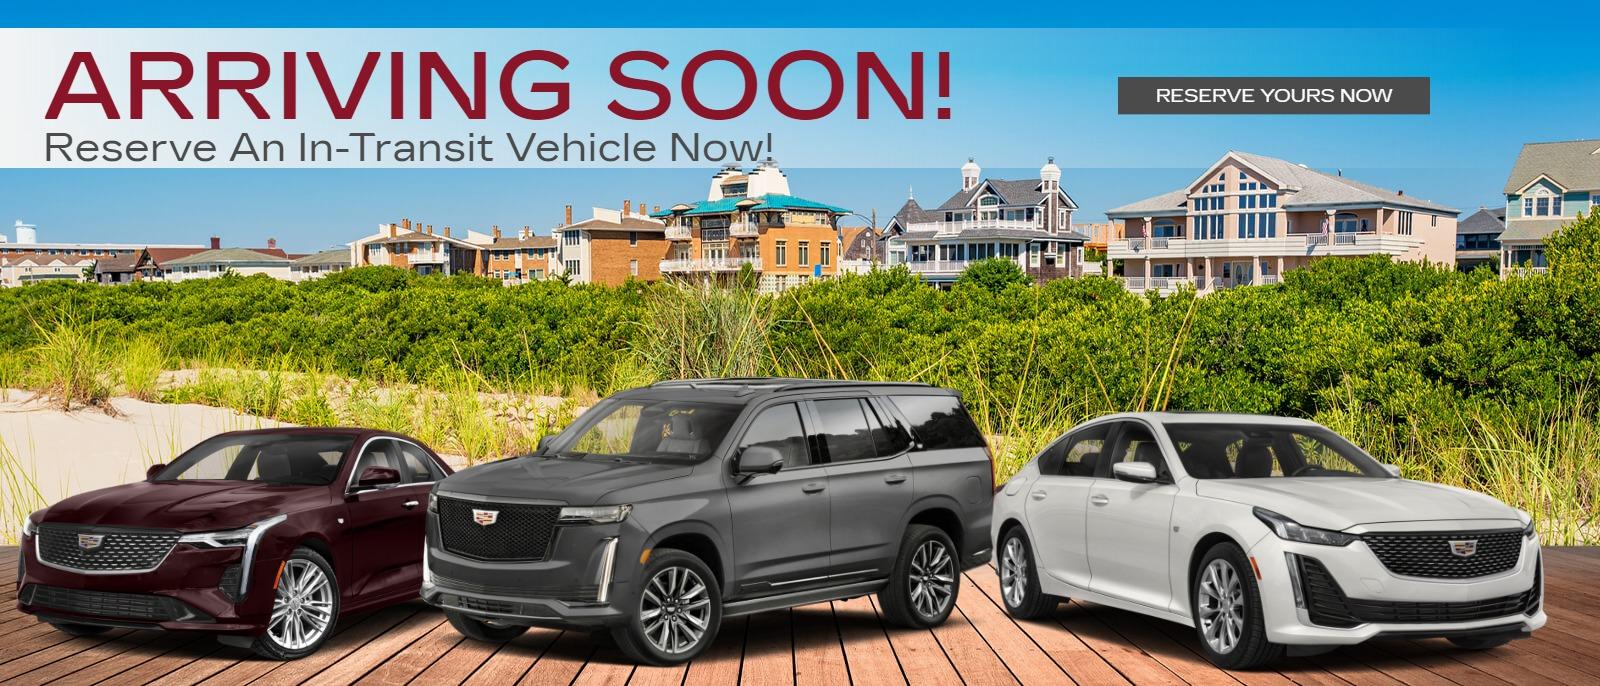 ARRIVING SOON!
Reserve An In-Transit Vehicle Now!